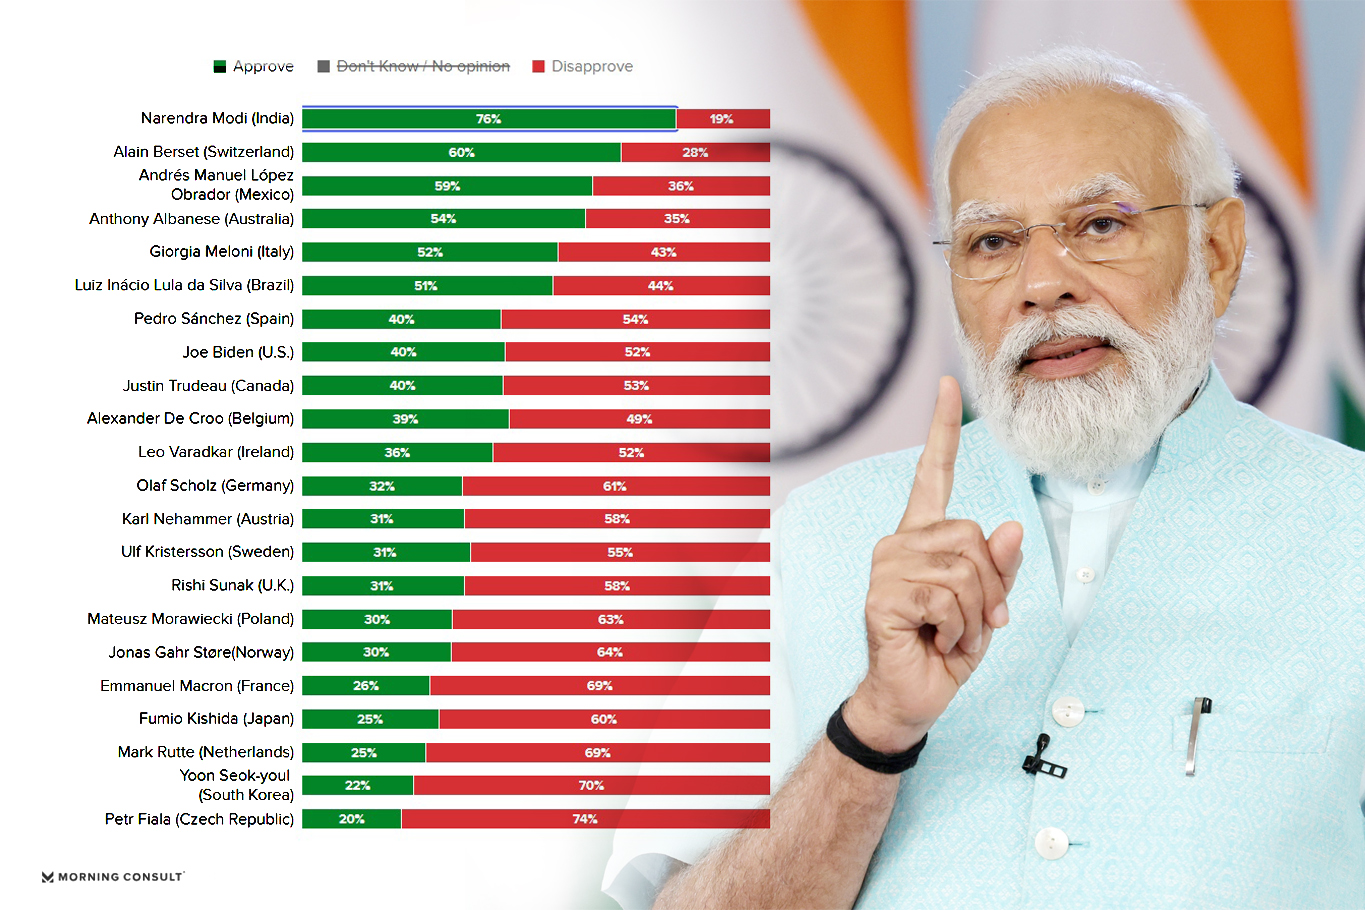 With a 75 approval rating, PM Modi surpasses other world leaders